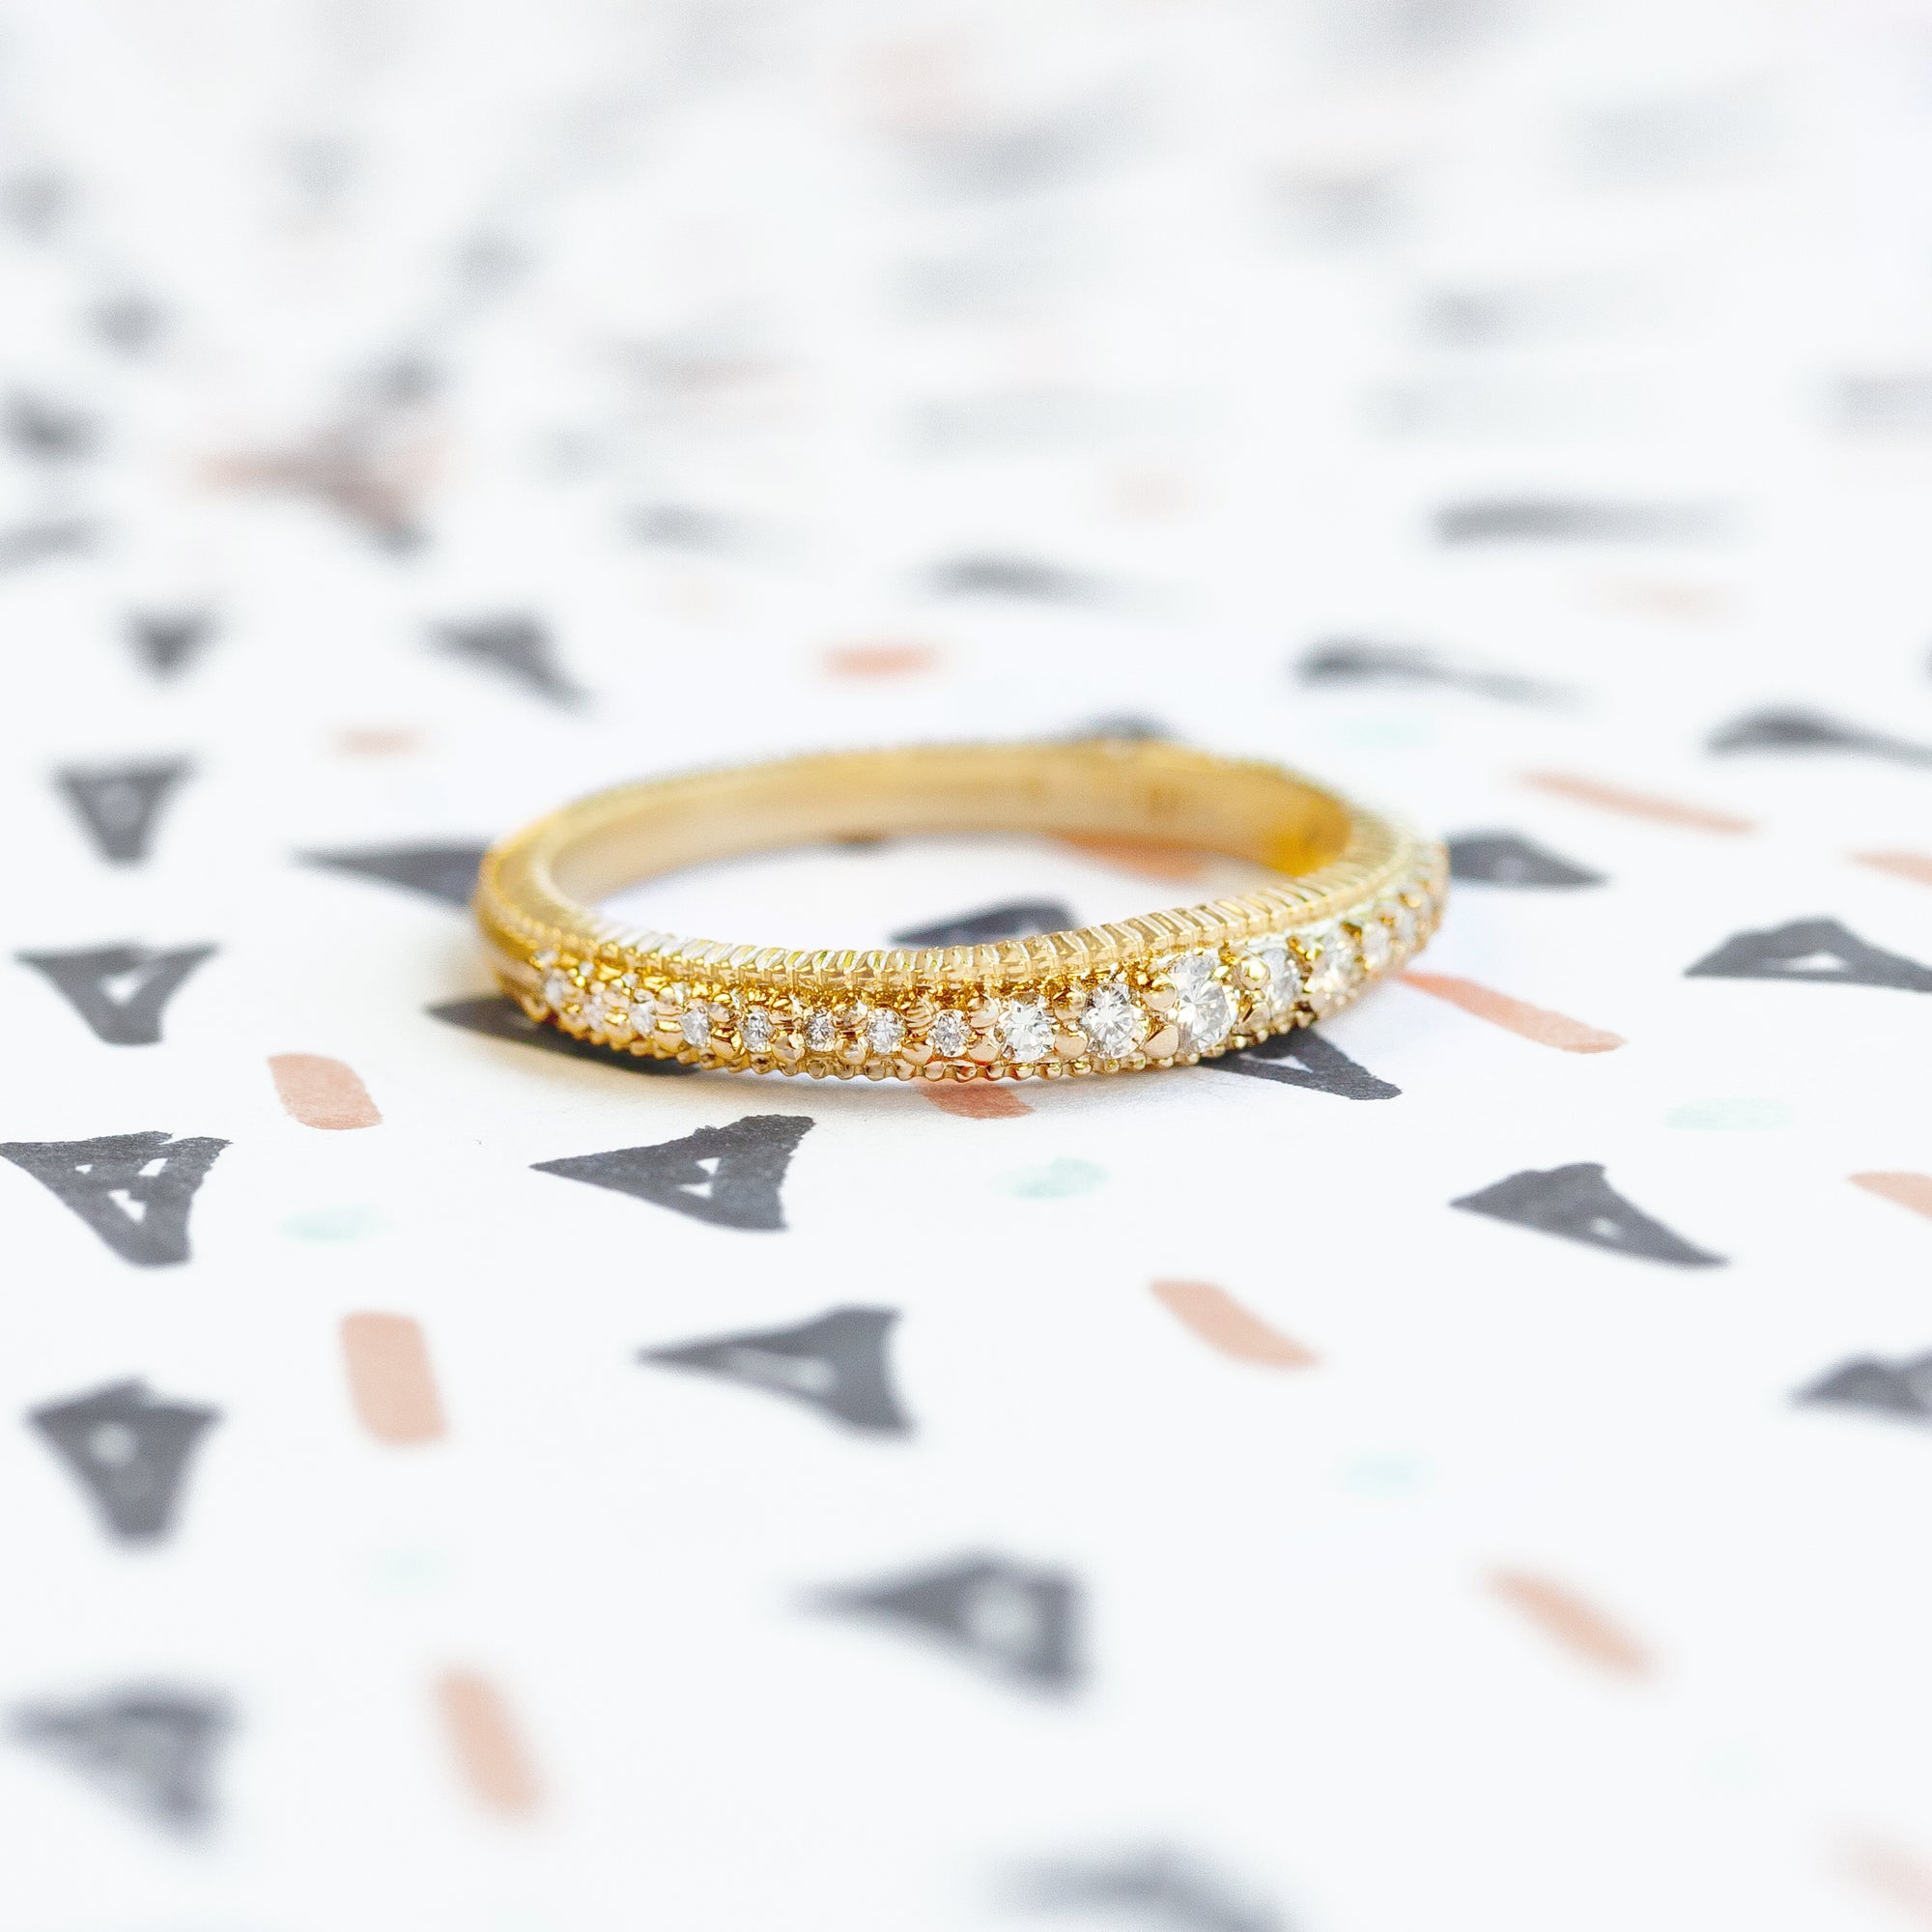 Handmade classic wedding band with graduated size diamonds and ribbing in 18K yellow gold by Designer Megan Thorne 